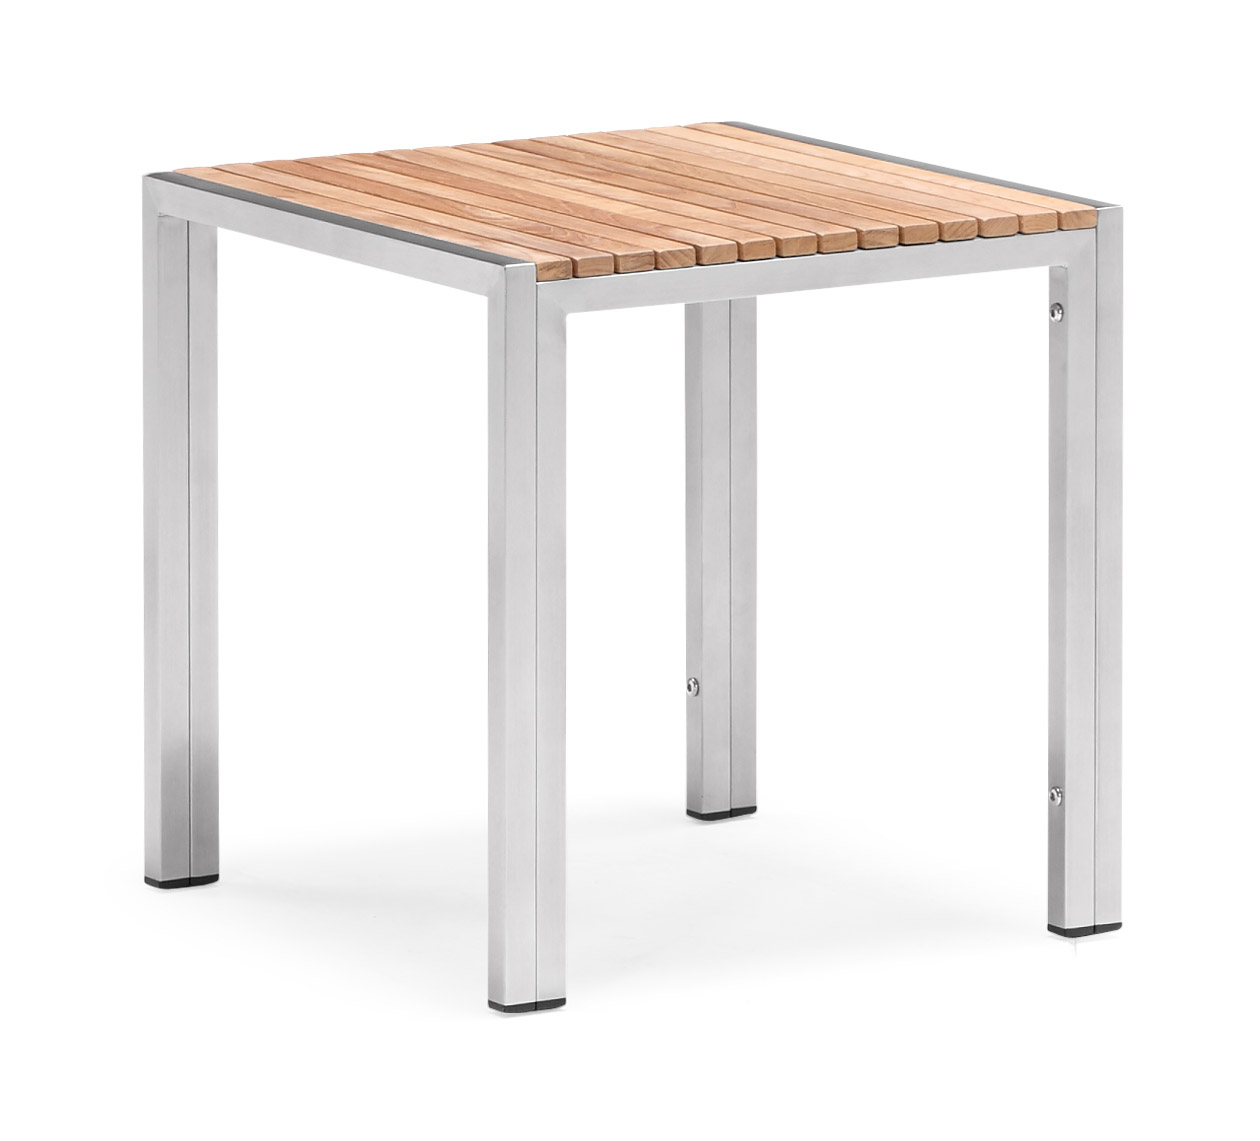 Outdoor square dining table teak table (T004MB)